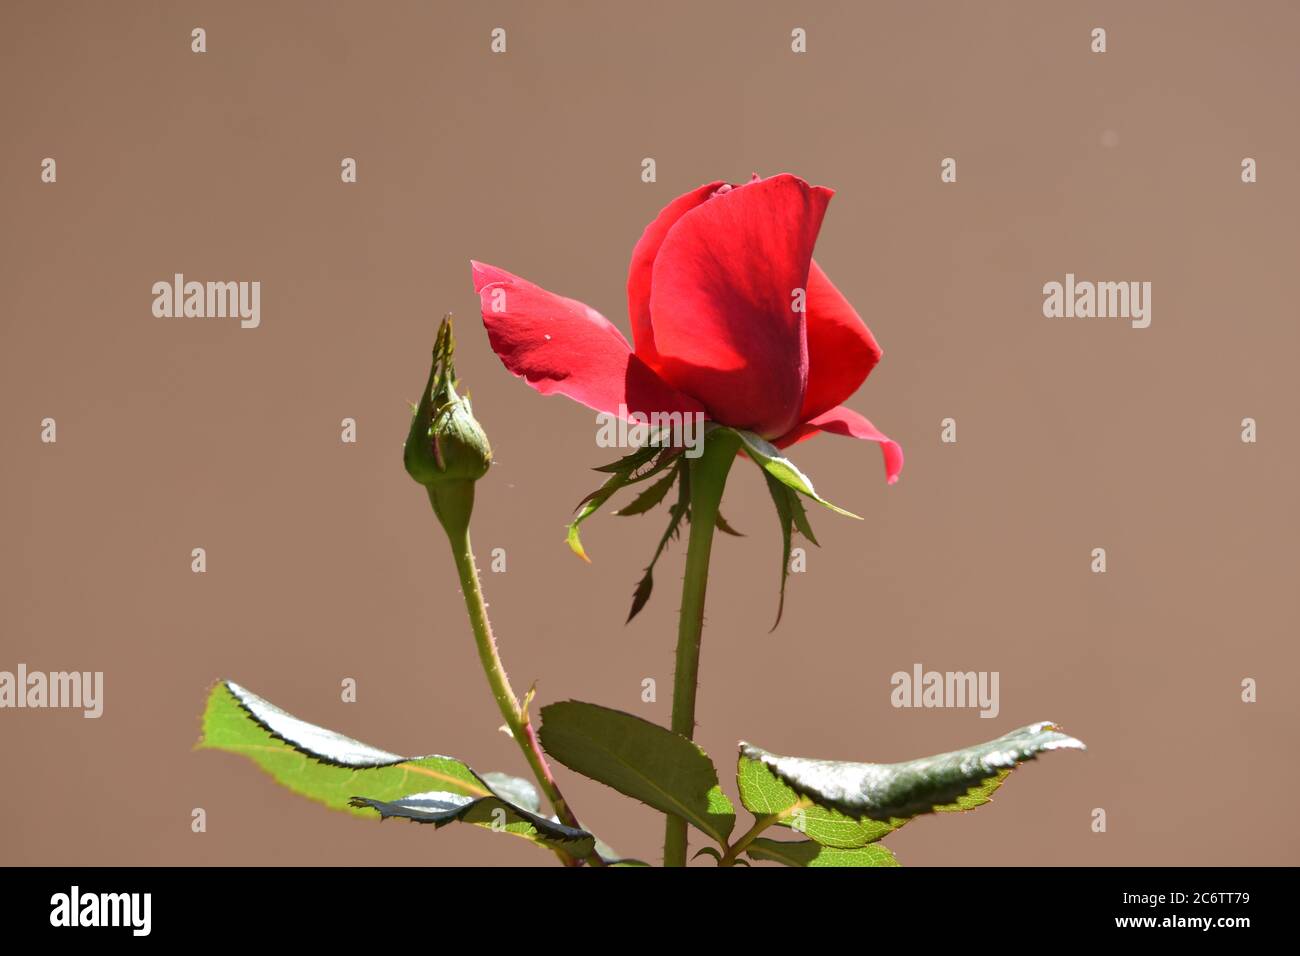 A rose bud beginning to bloom. Stock Photo